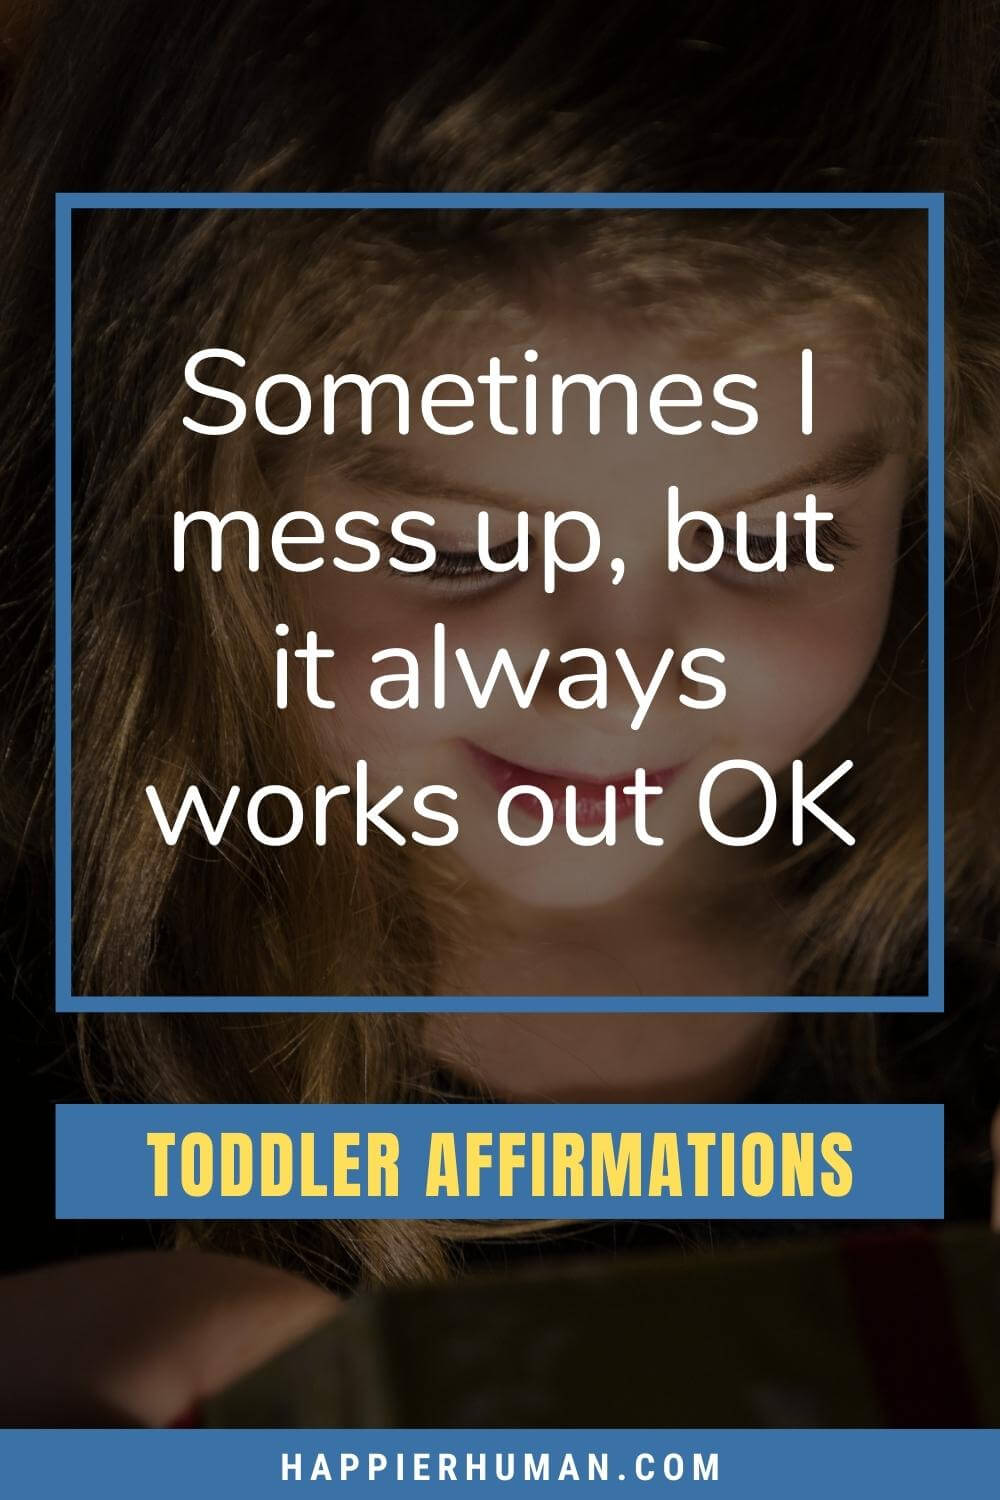 Toddler Affirmations - Sometimes I mess up, but it always works out OK | positive affirmations for my daughter | affirmations for preschoolers | morning affirmations for kids